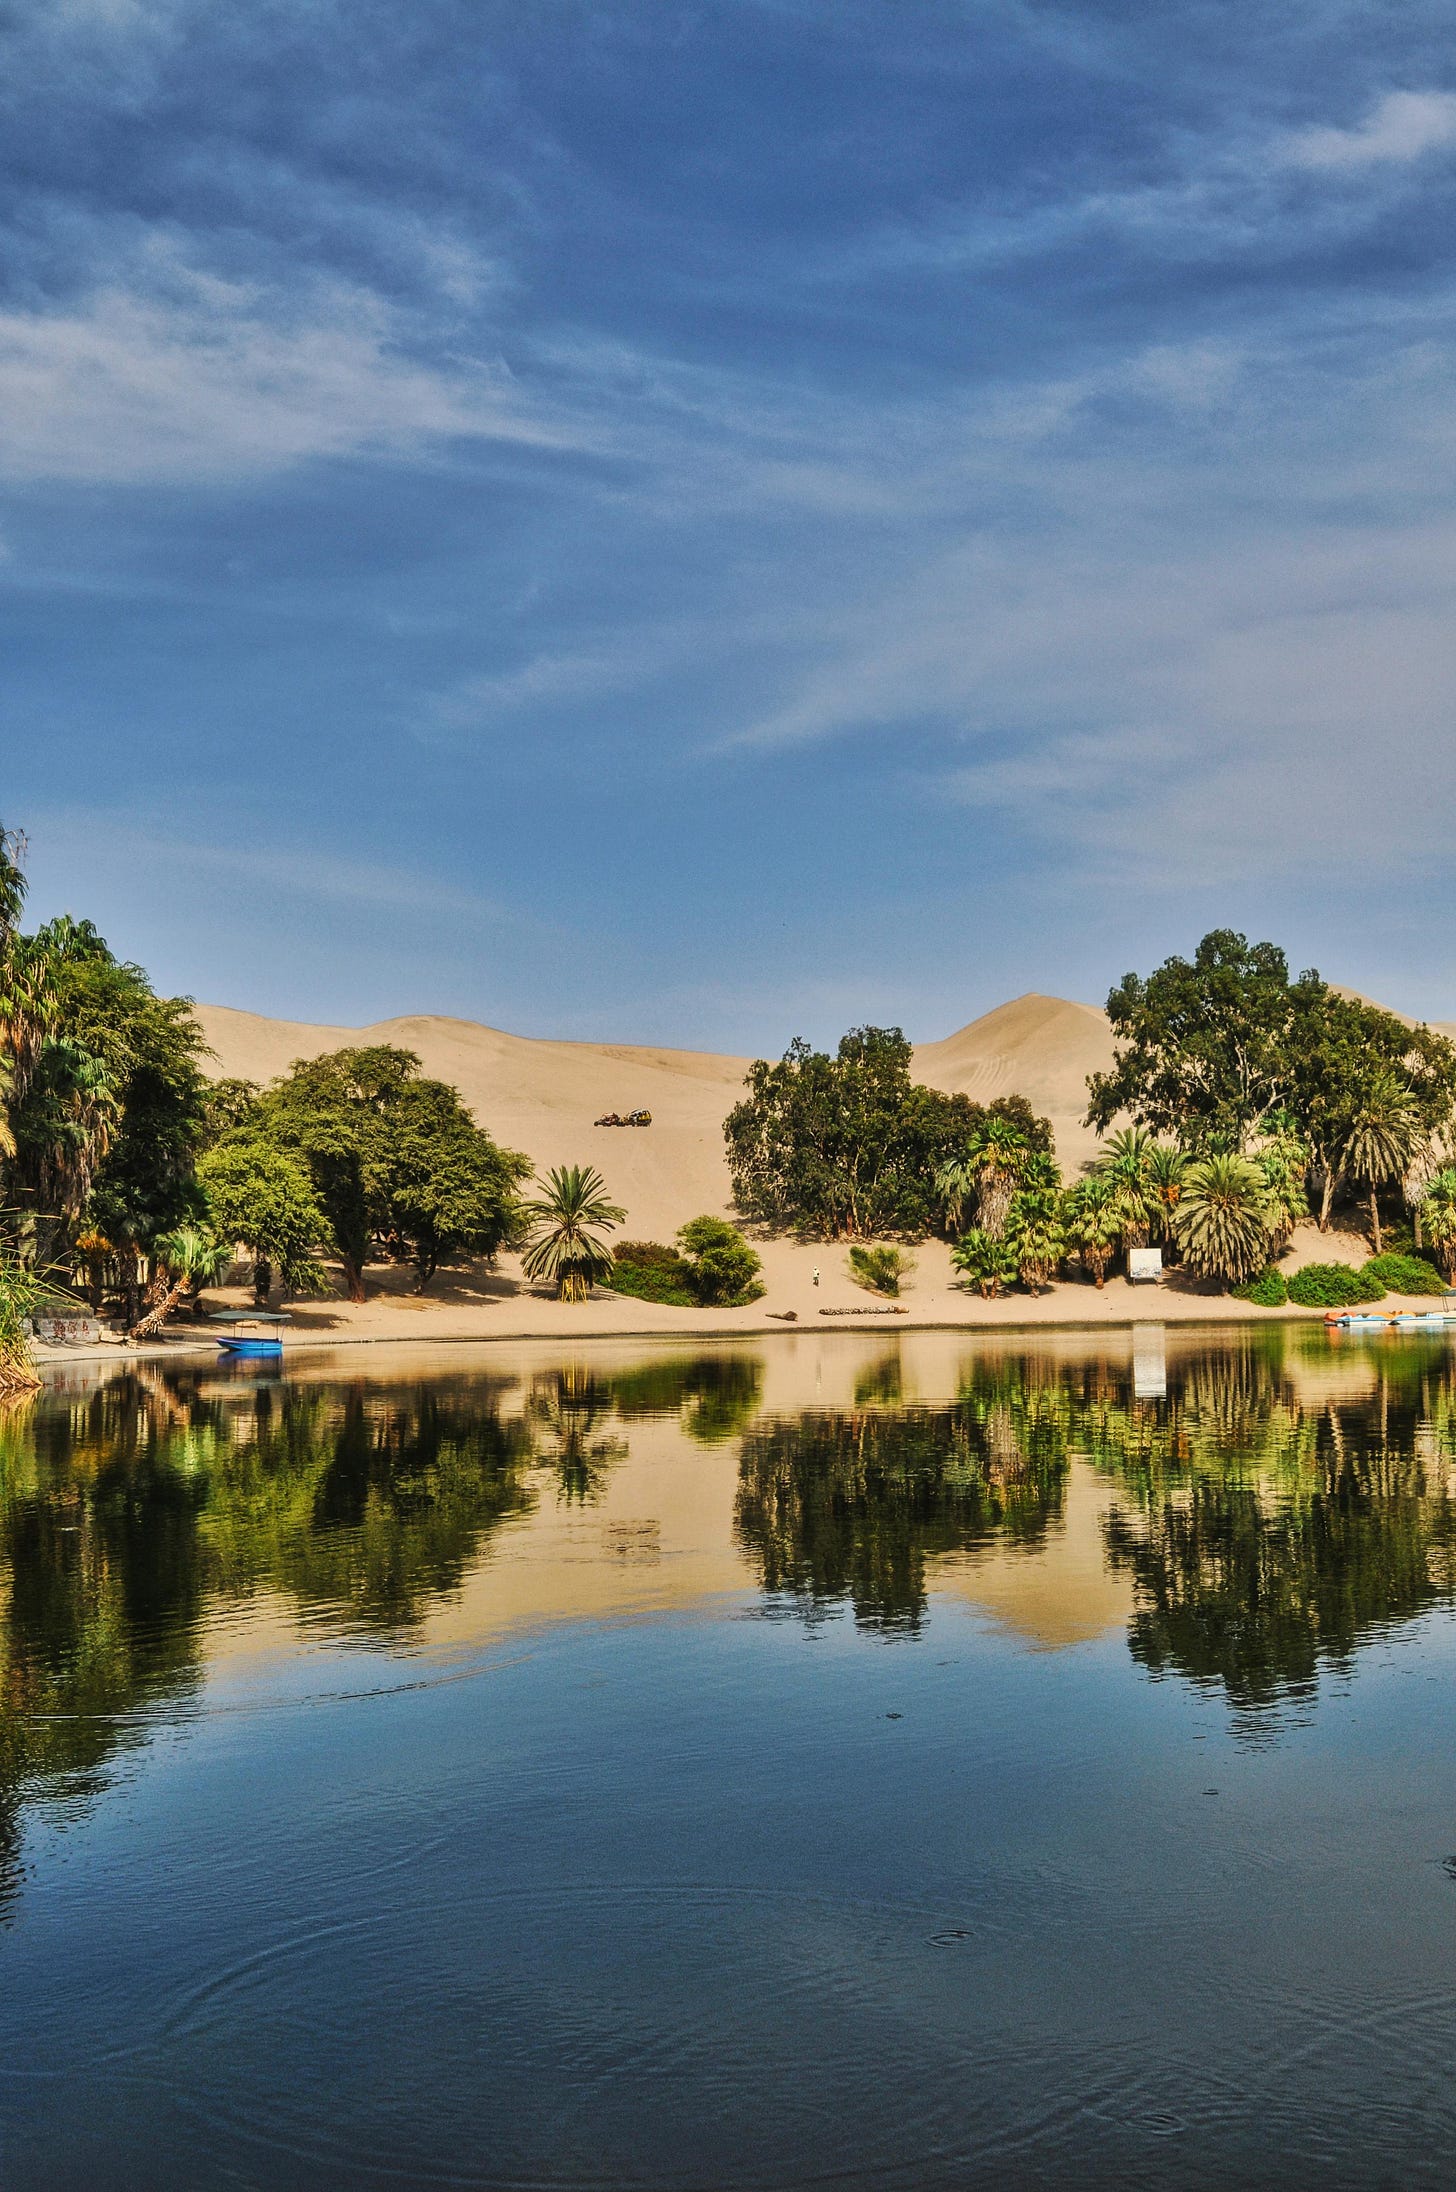 A desert oasis with a beautiful reflection. 